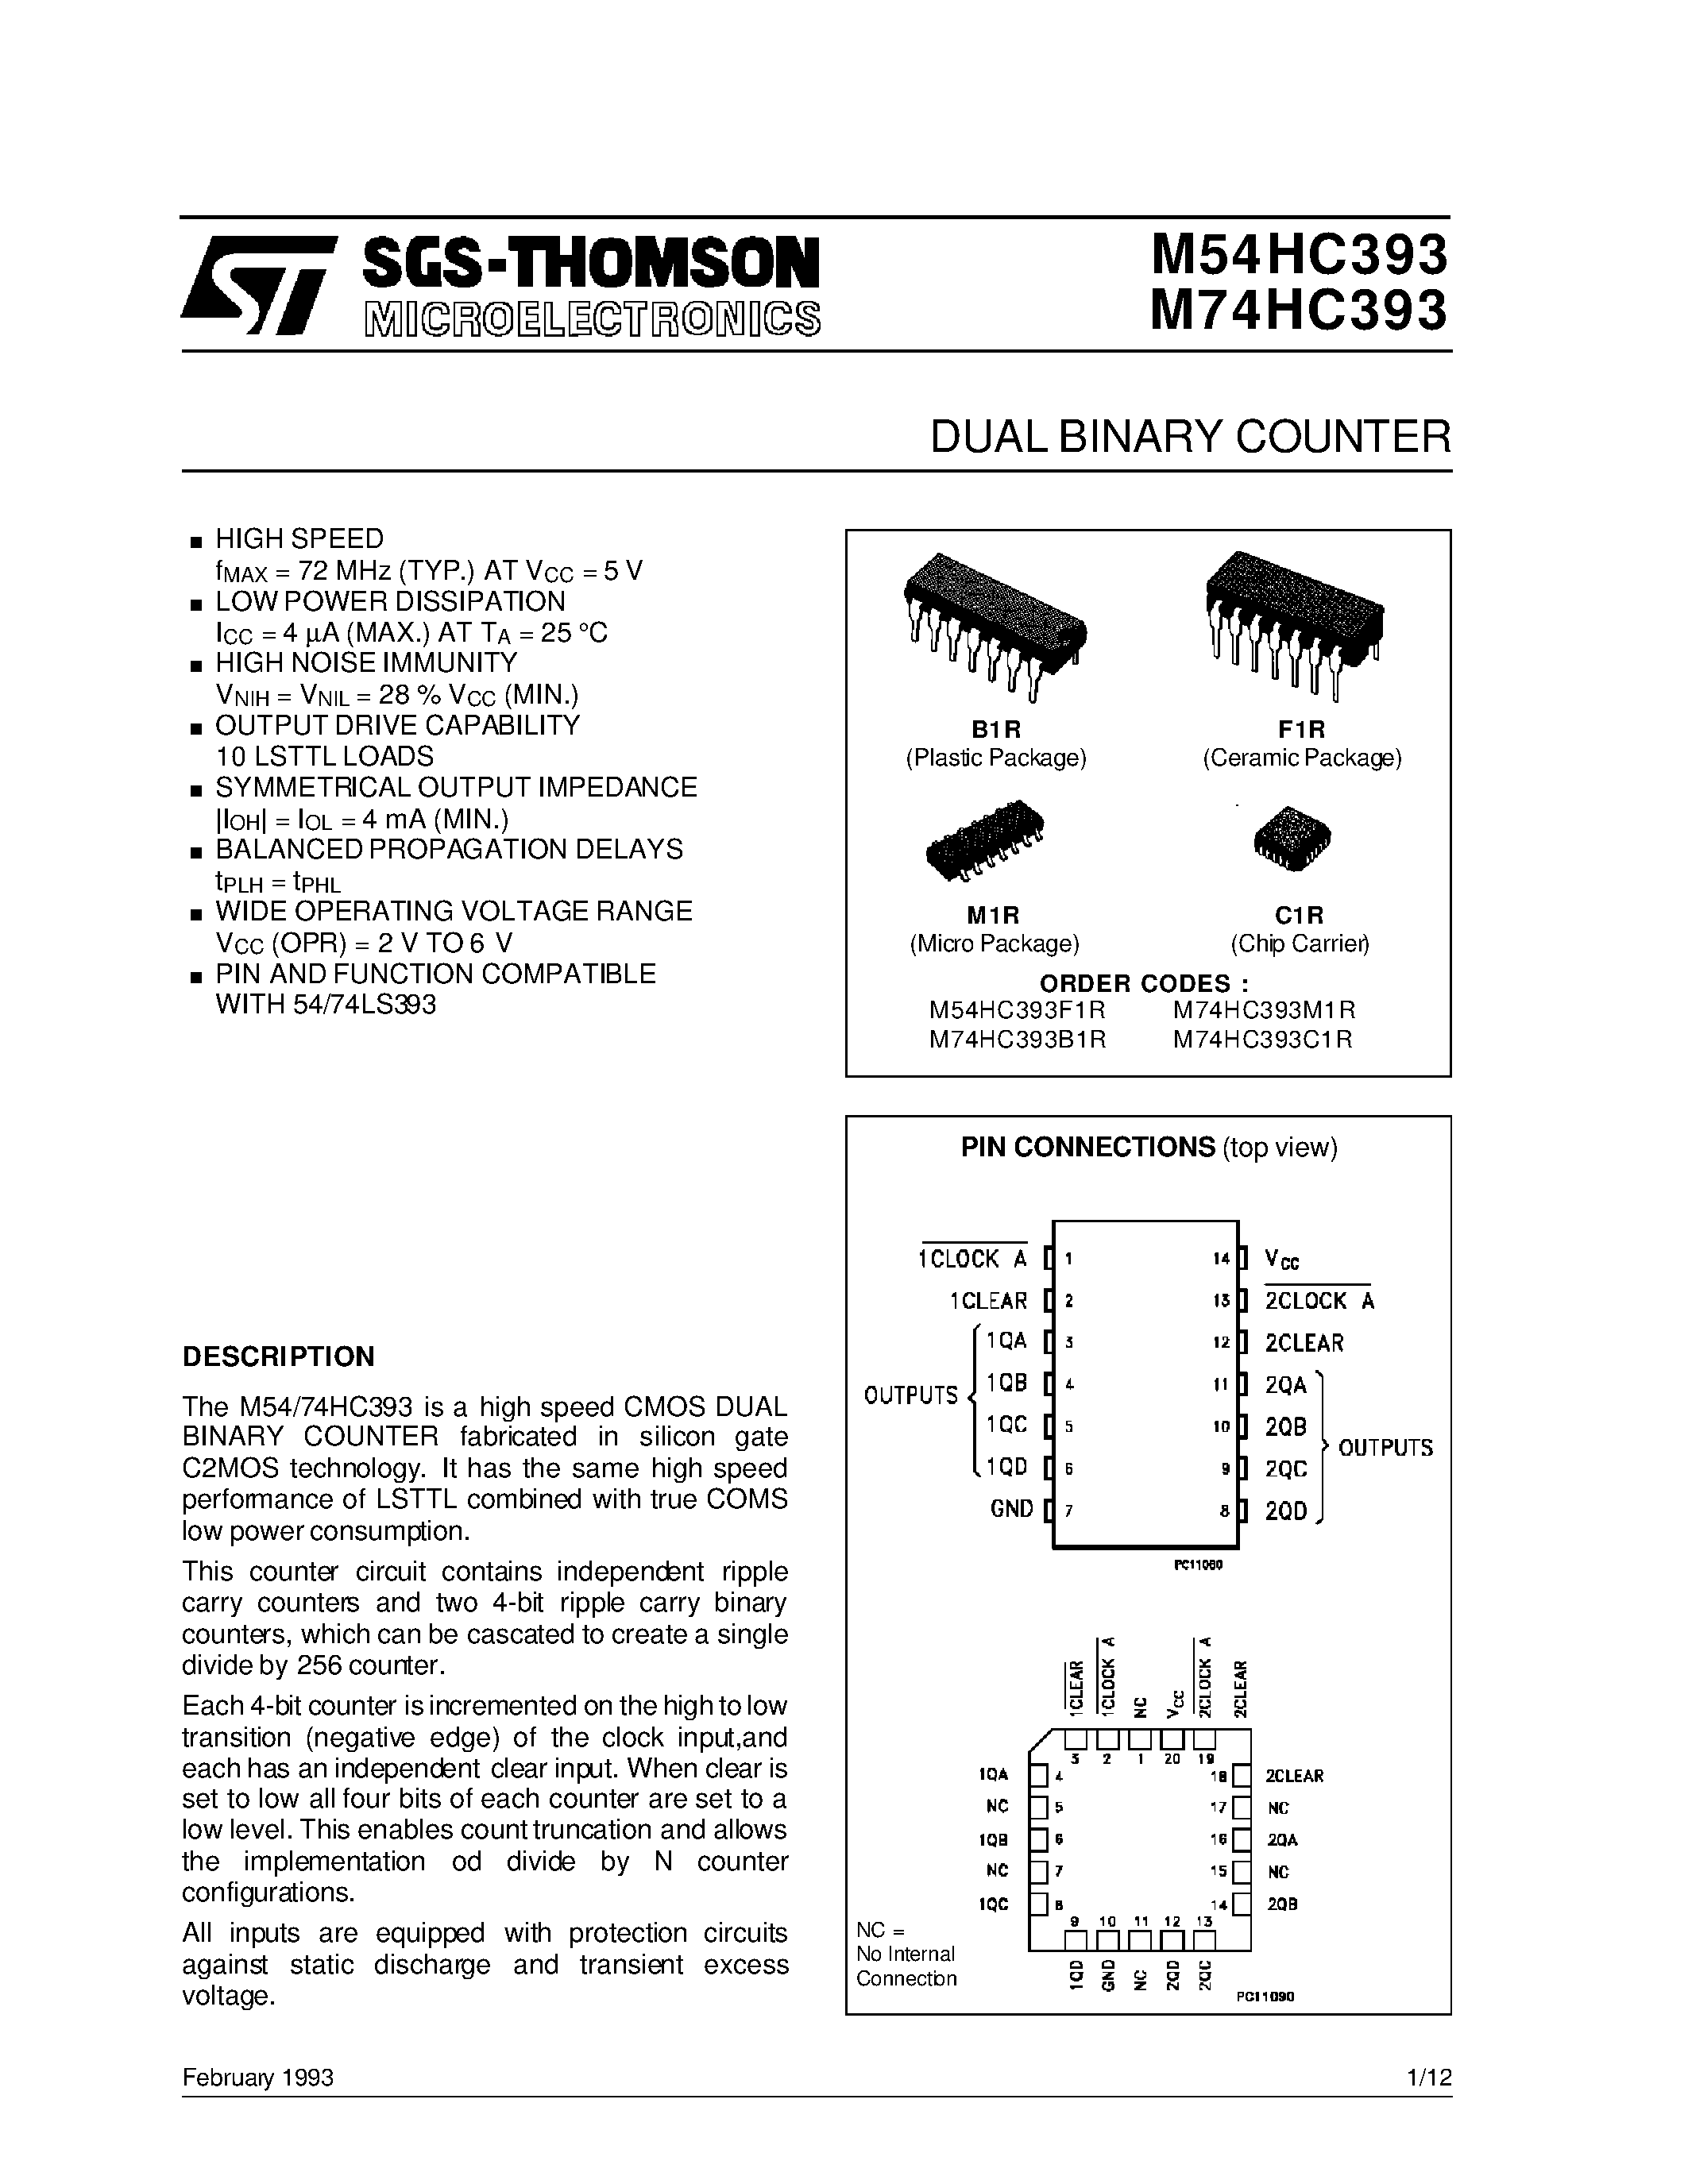 Datasheet M74HC393 - M54HC390F1R M74HC390M1R M74HC390B1R M74HC390C1R page 1